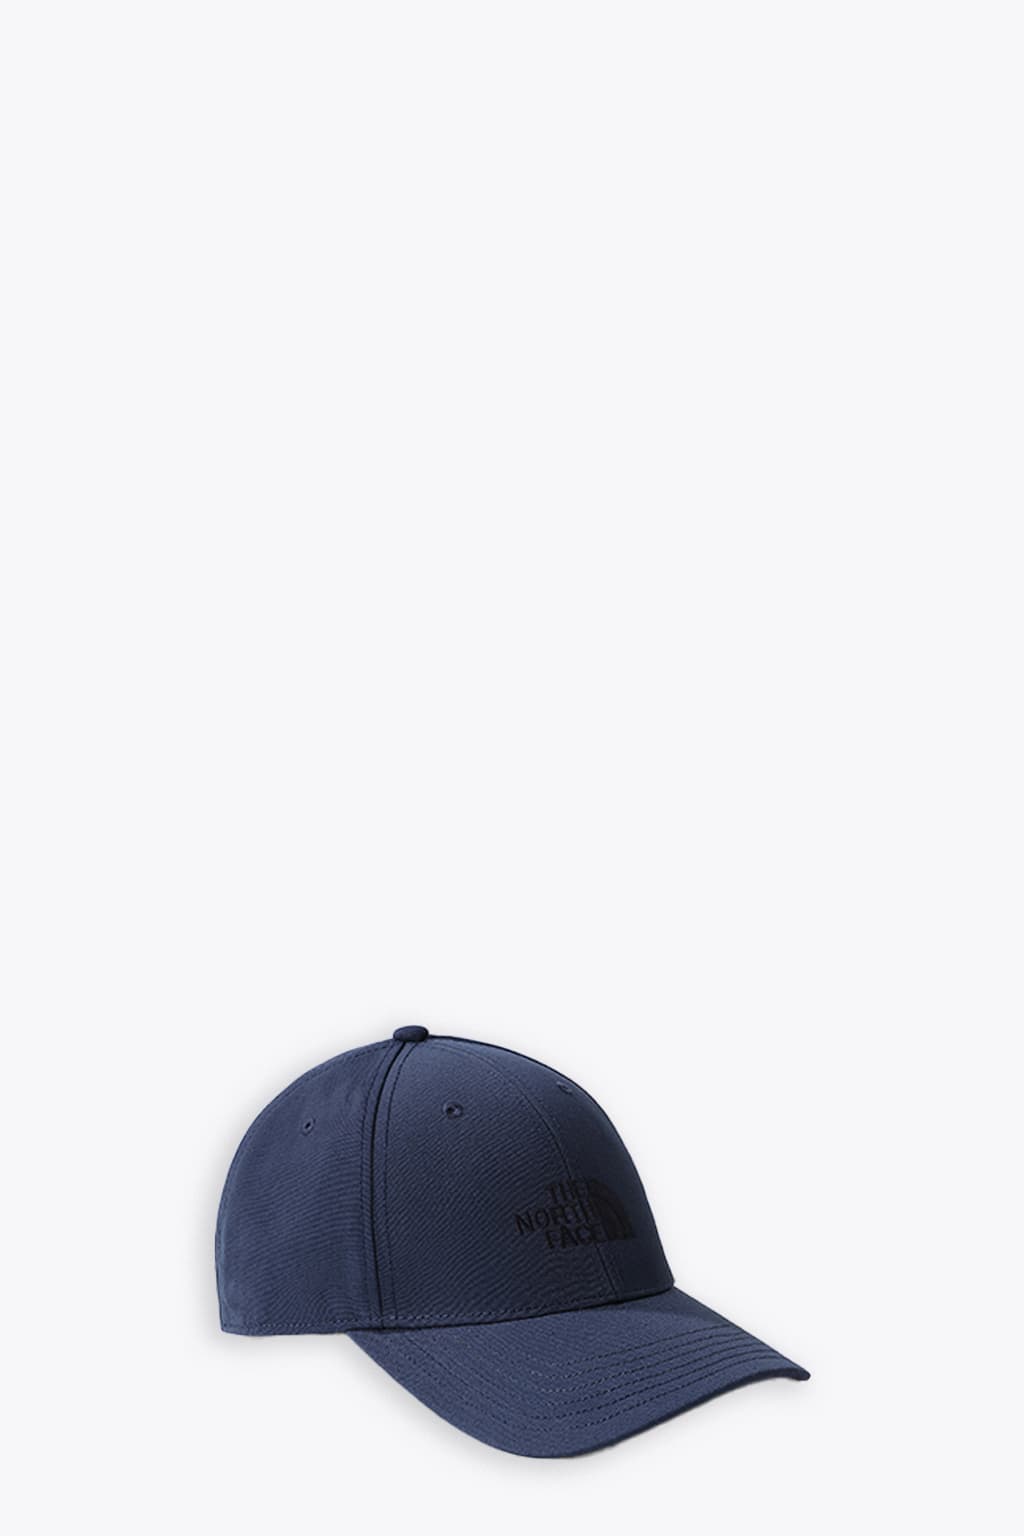 Face Blue Recycled Cap Logo Hat Classic Recycled | The Closet 66 66 Embroidery - With North Smart Hat Classic